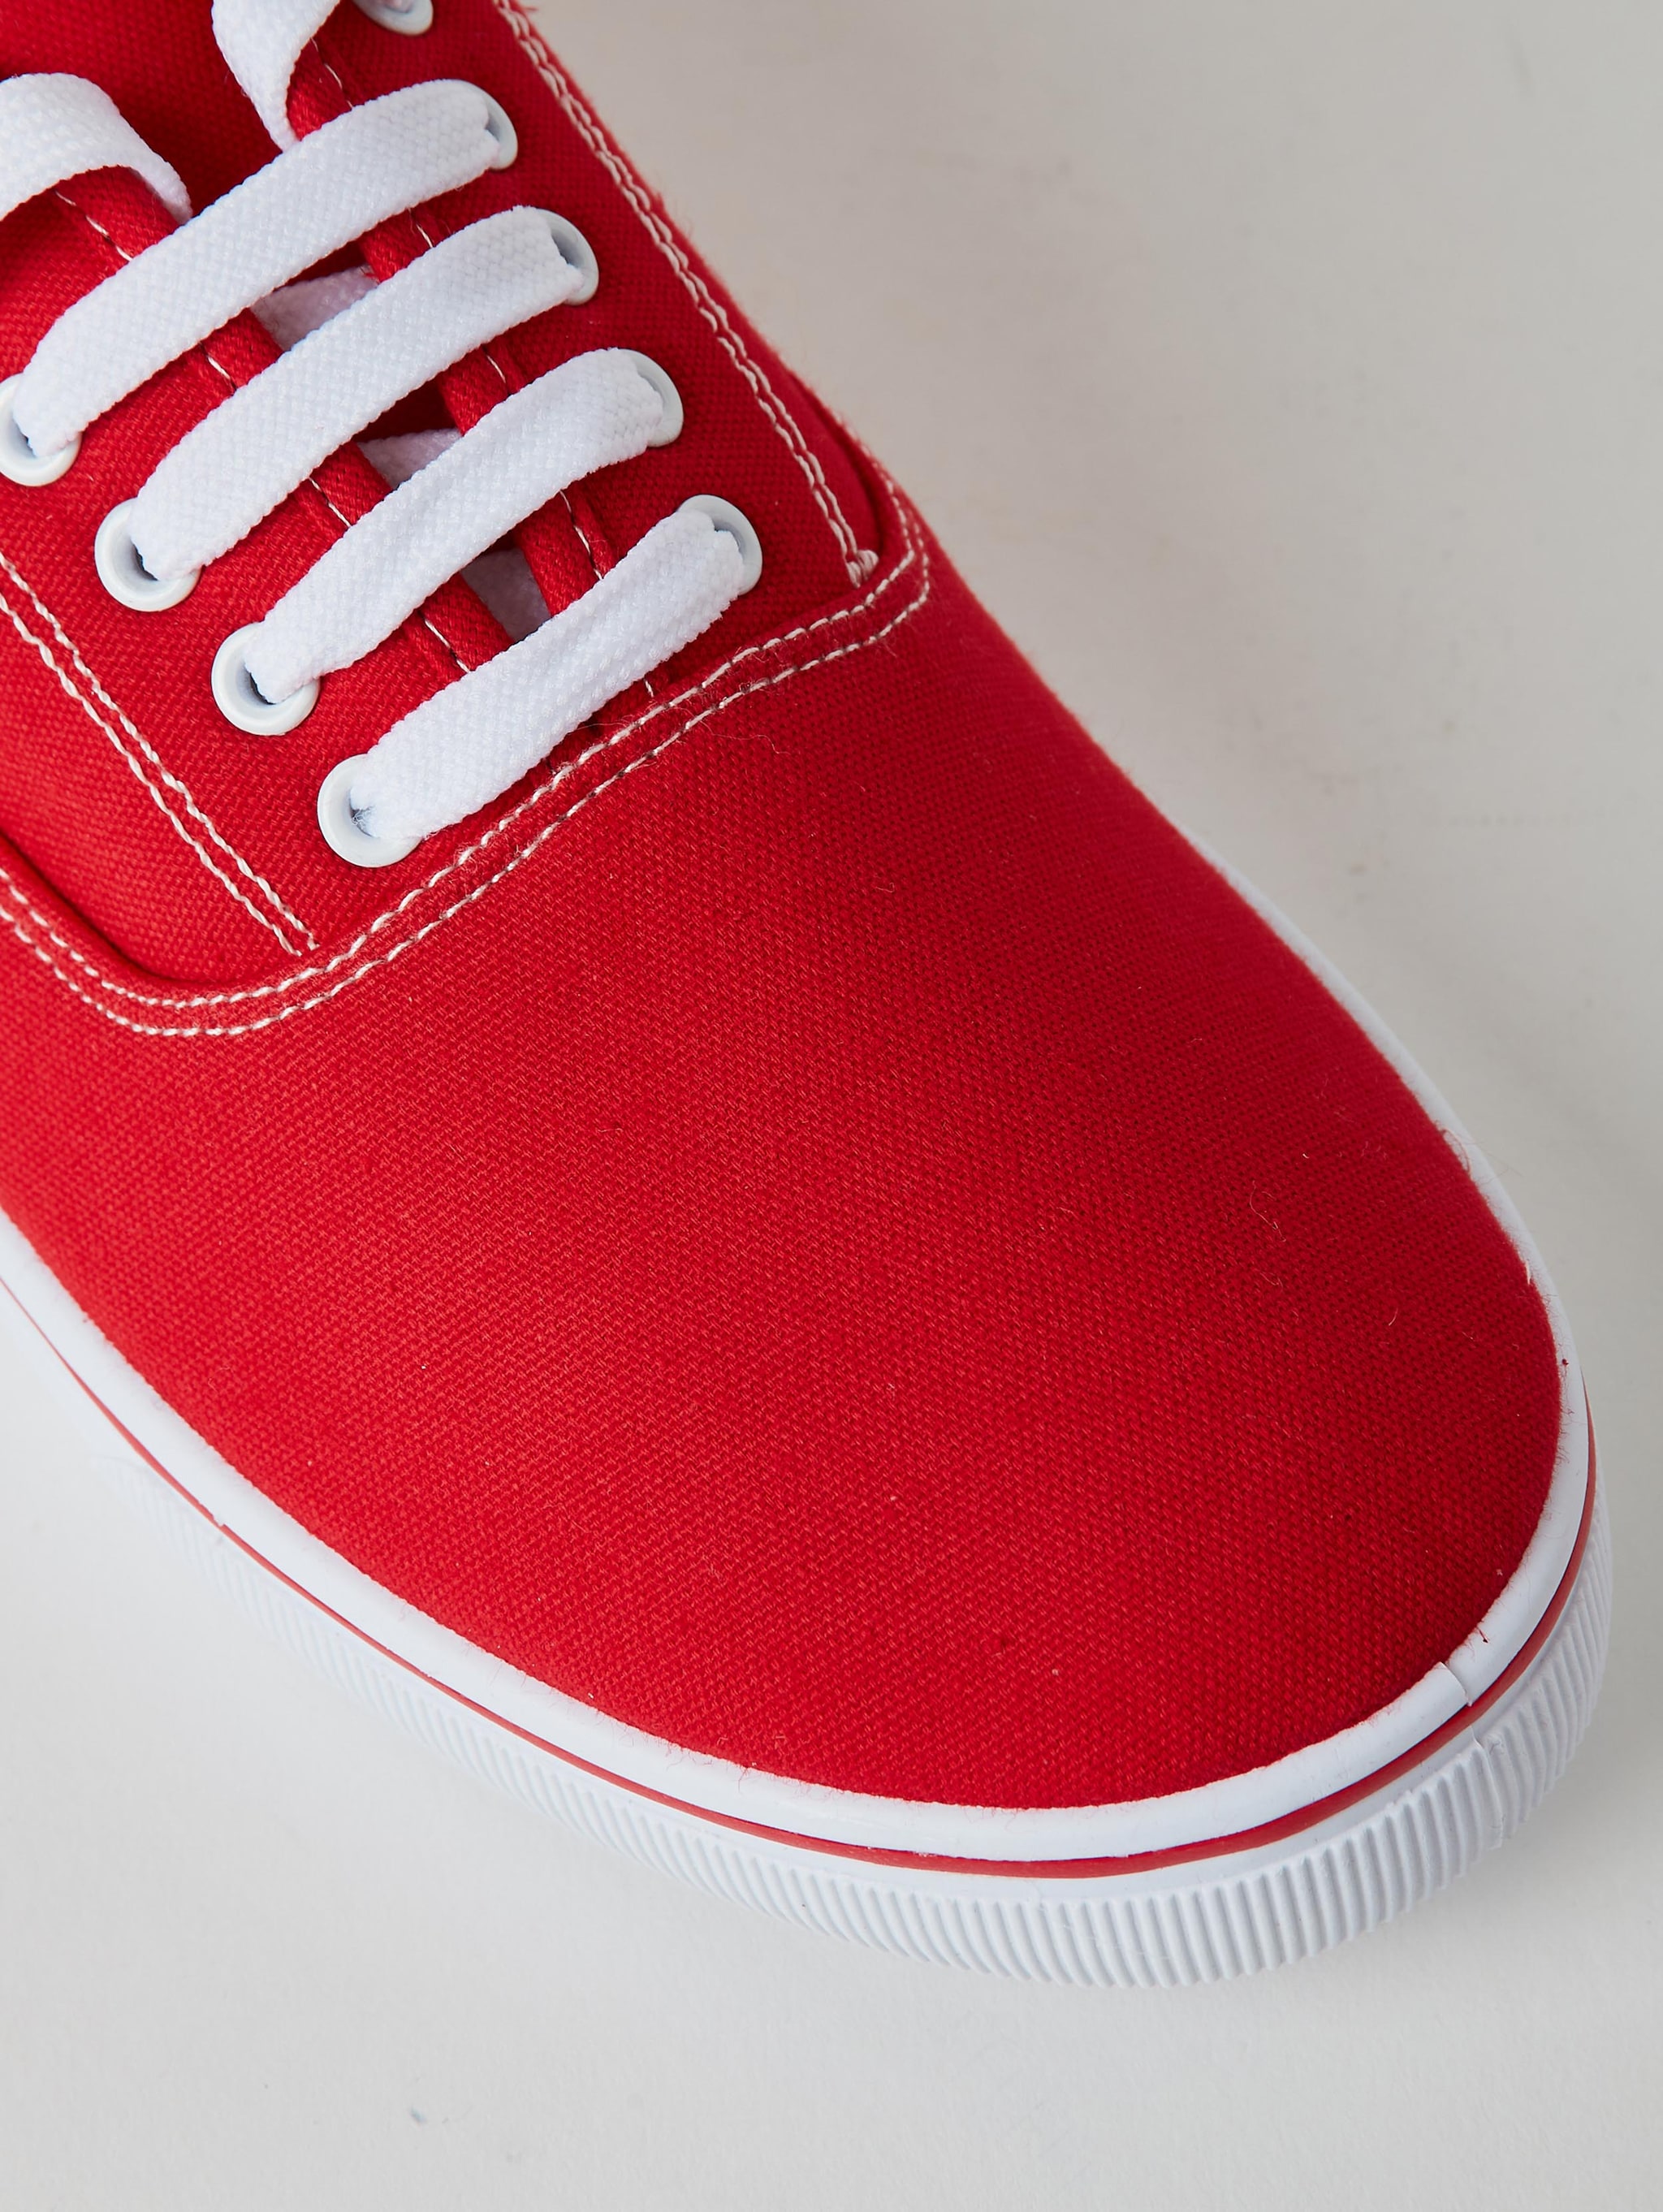 Red bright Canvas tennis shoes - Buy 